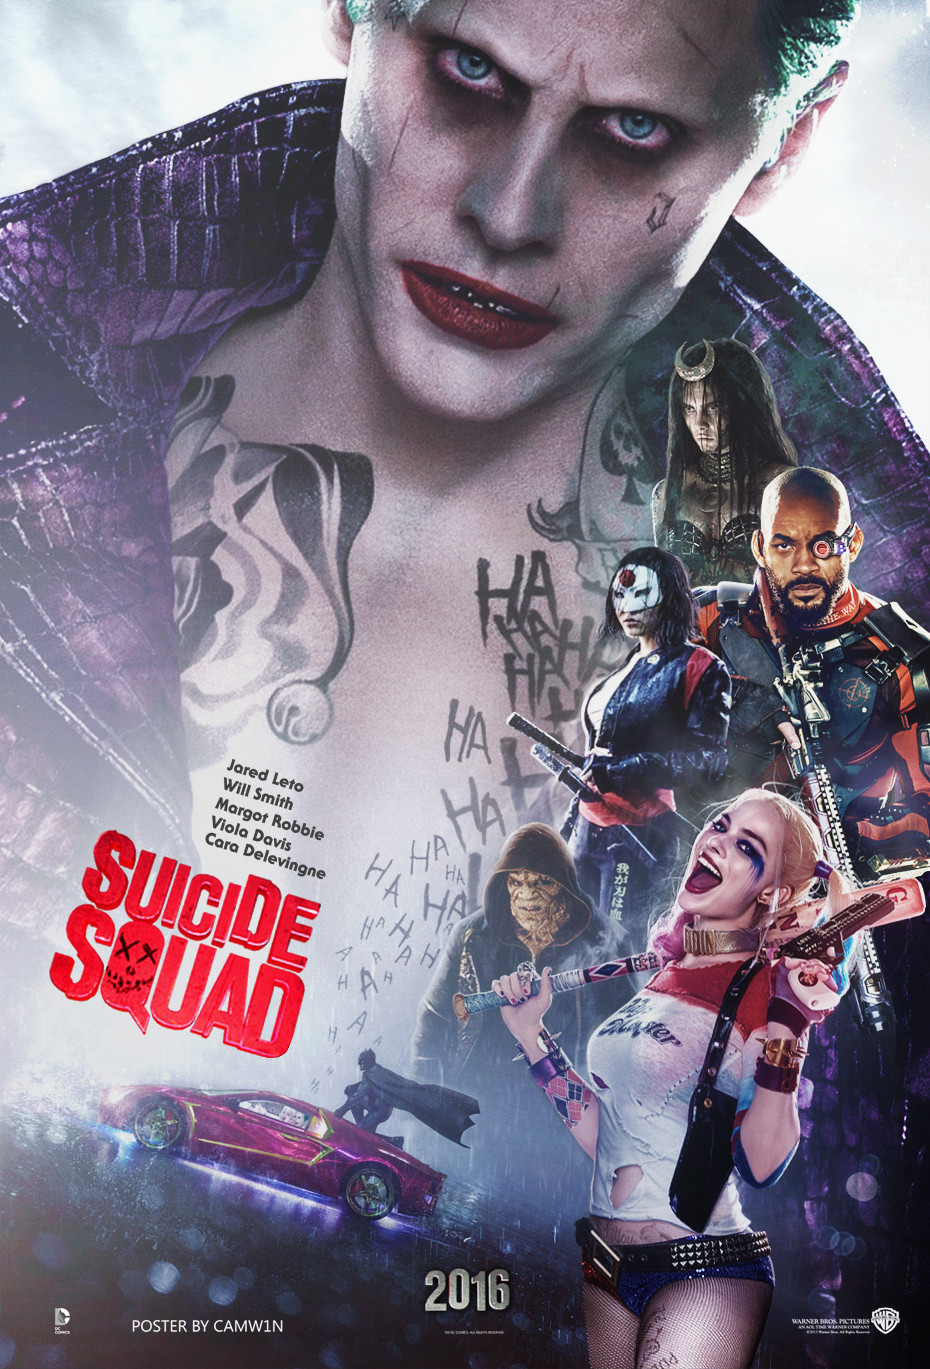 Suicide Squad (English) Full Movie In Hd 1080p Download